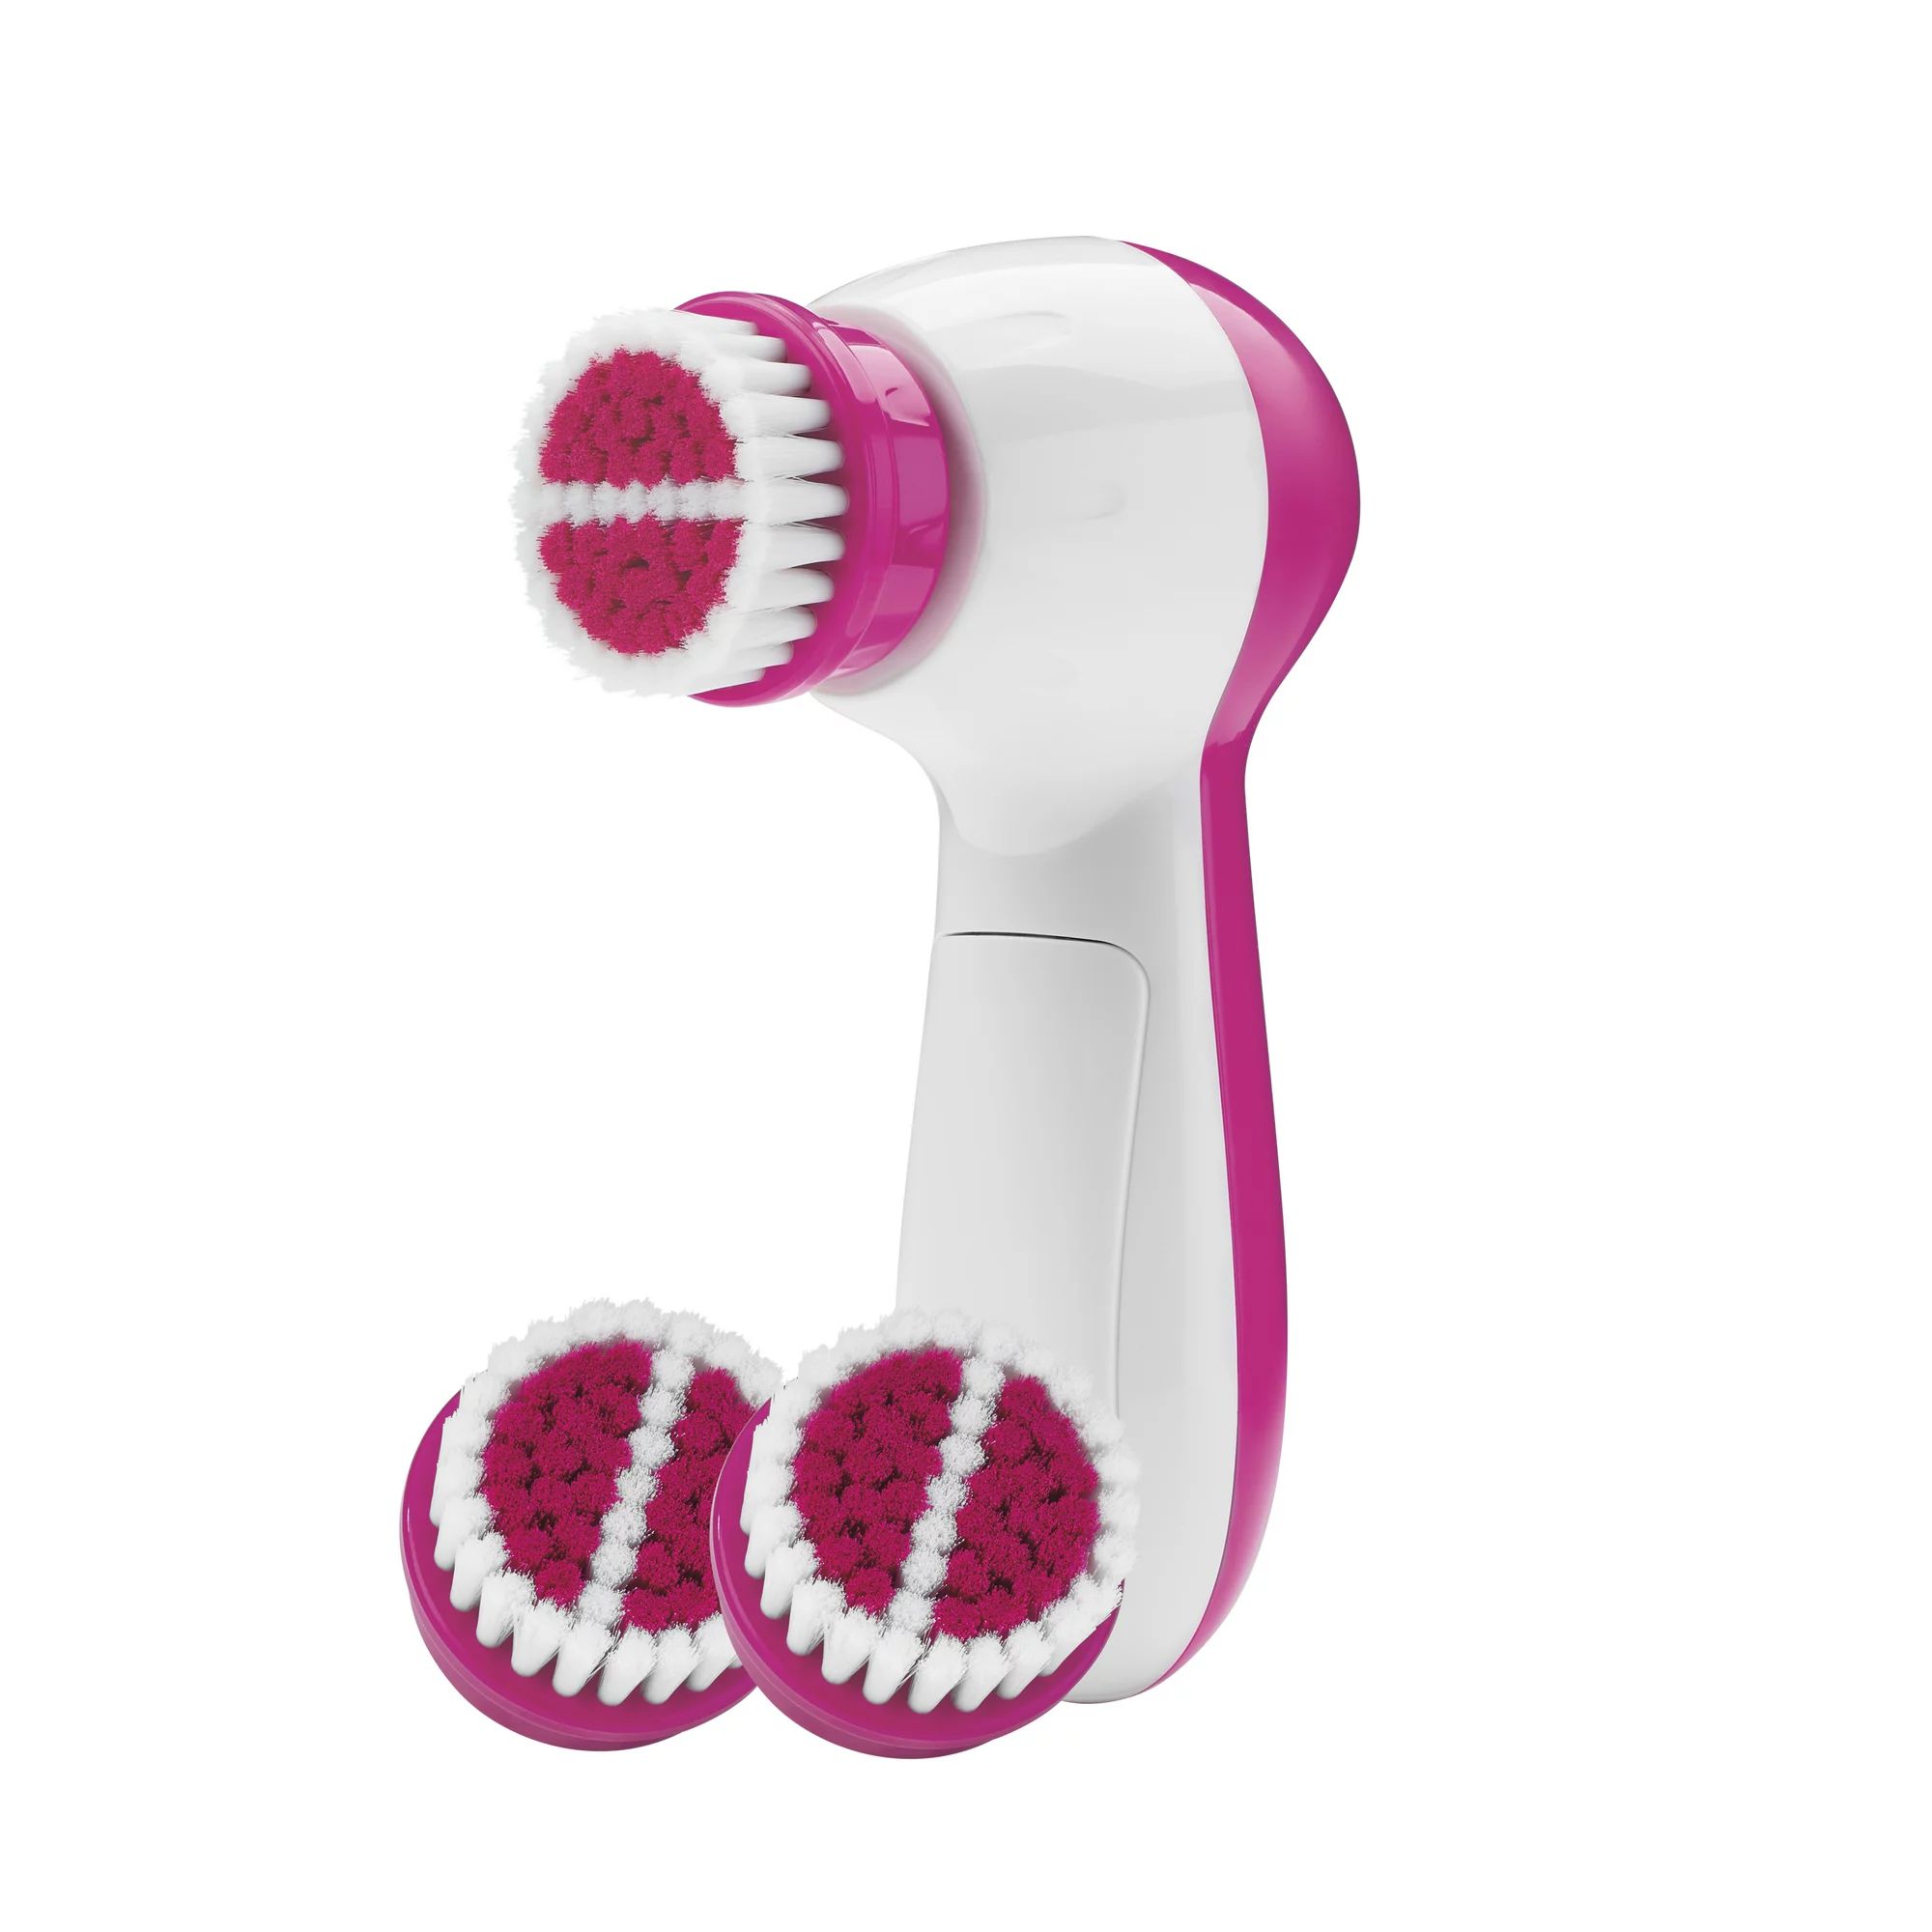 True Glow by Conair Facial Cleansing Brush Battery Operated, 3 Pieces FCB4WR | Walmart (US)